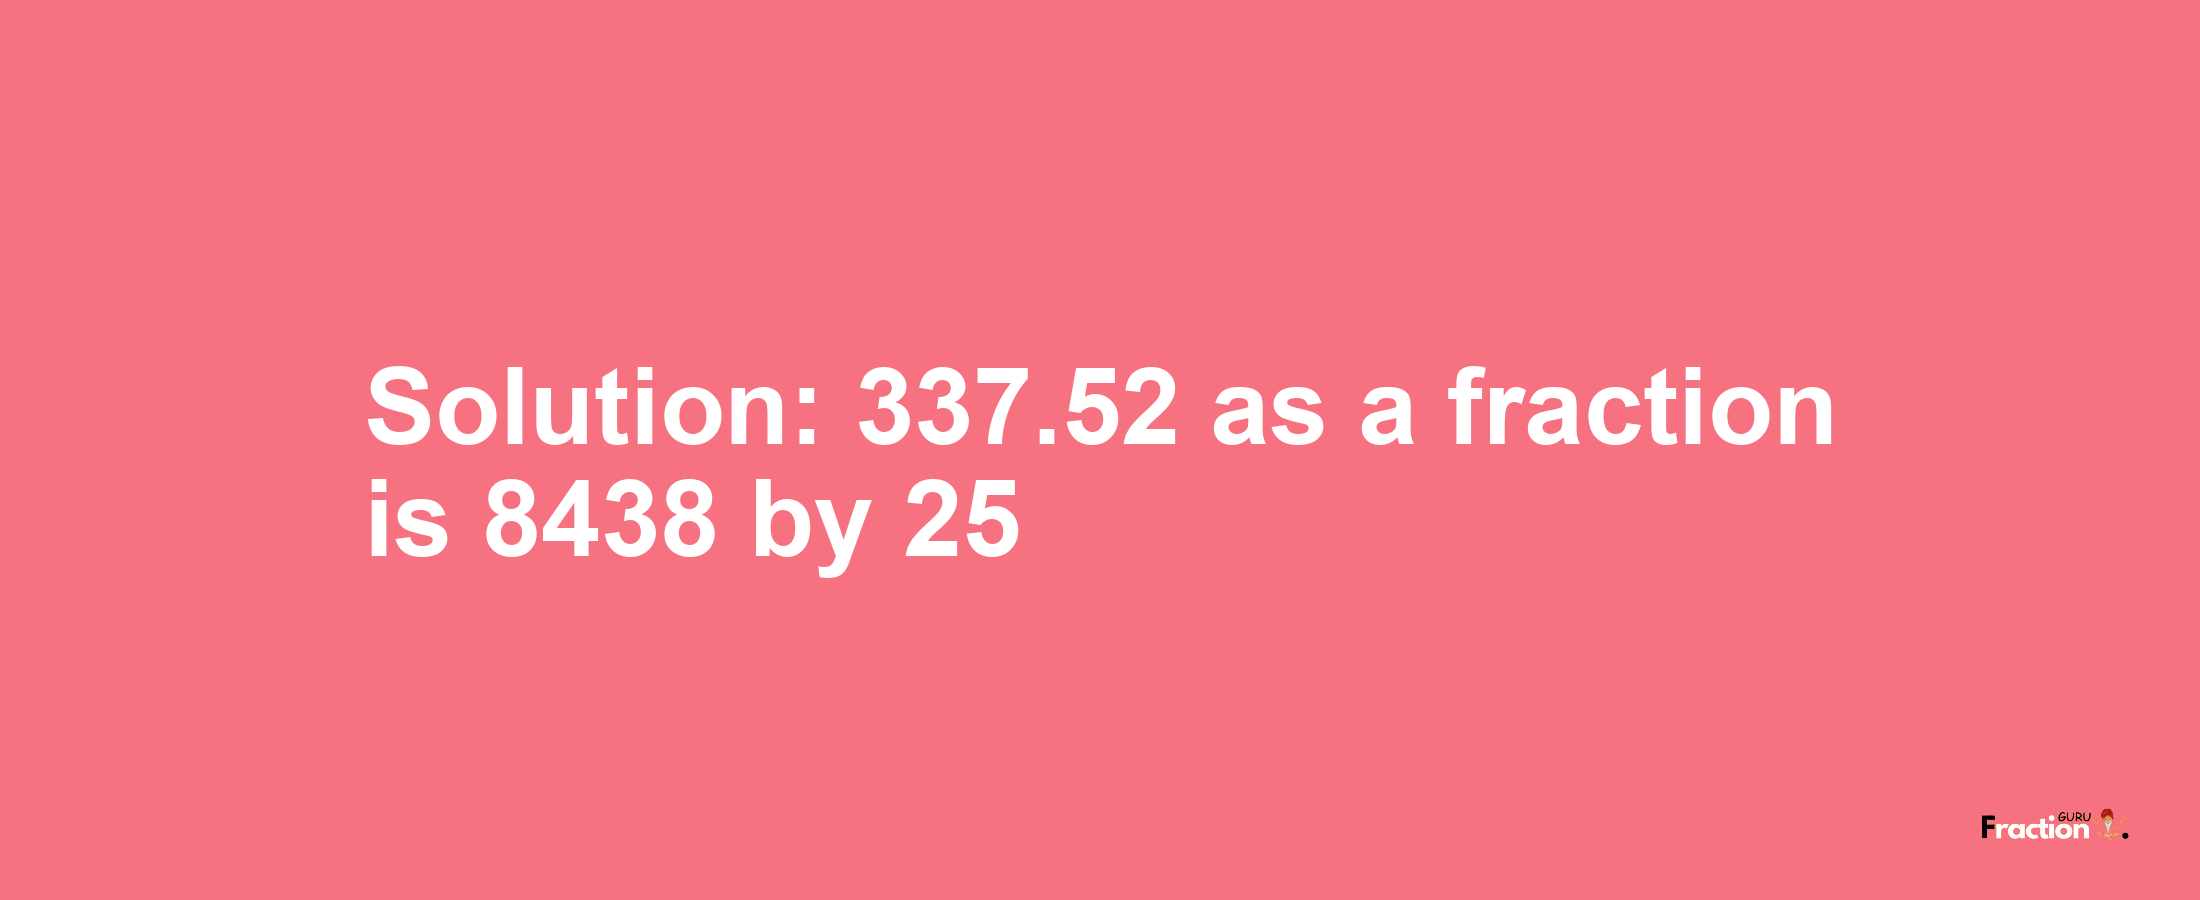 Solution:337.52 as a fraction is 8438/25